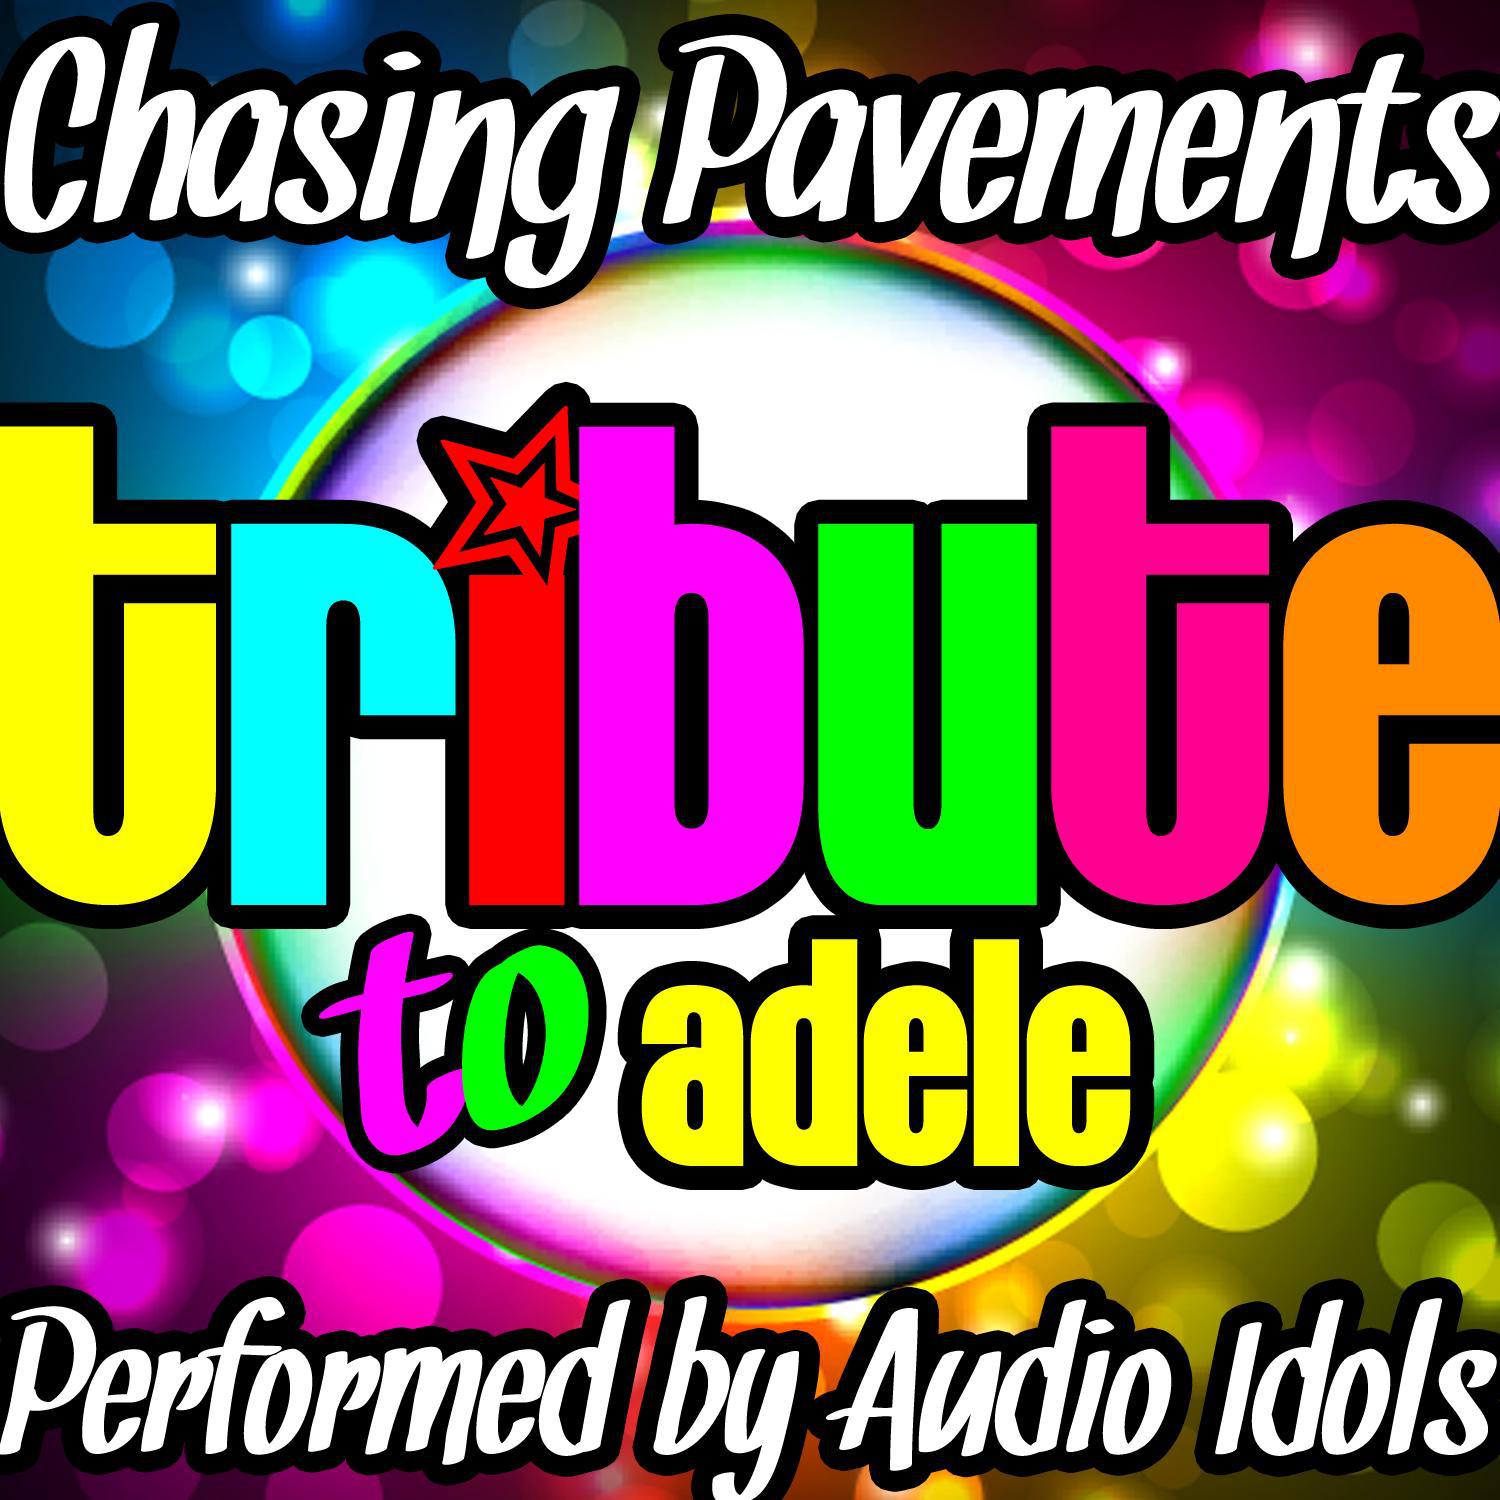 Chasing Pavements: Tribute to Adele